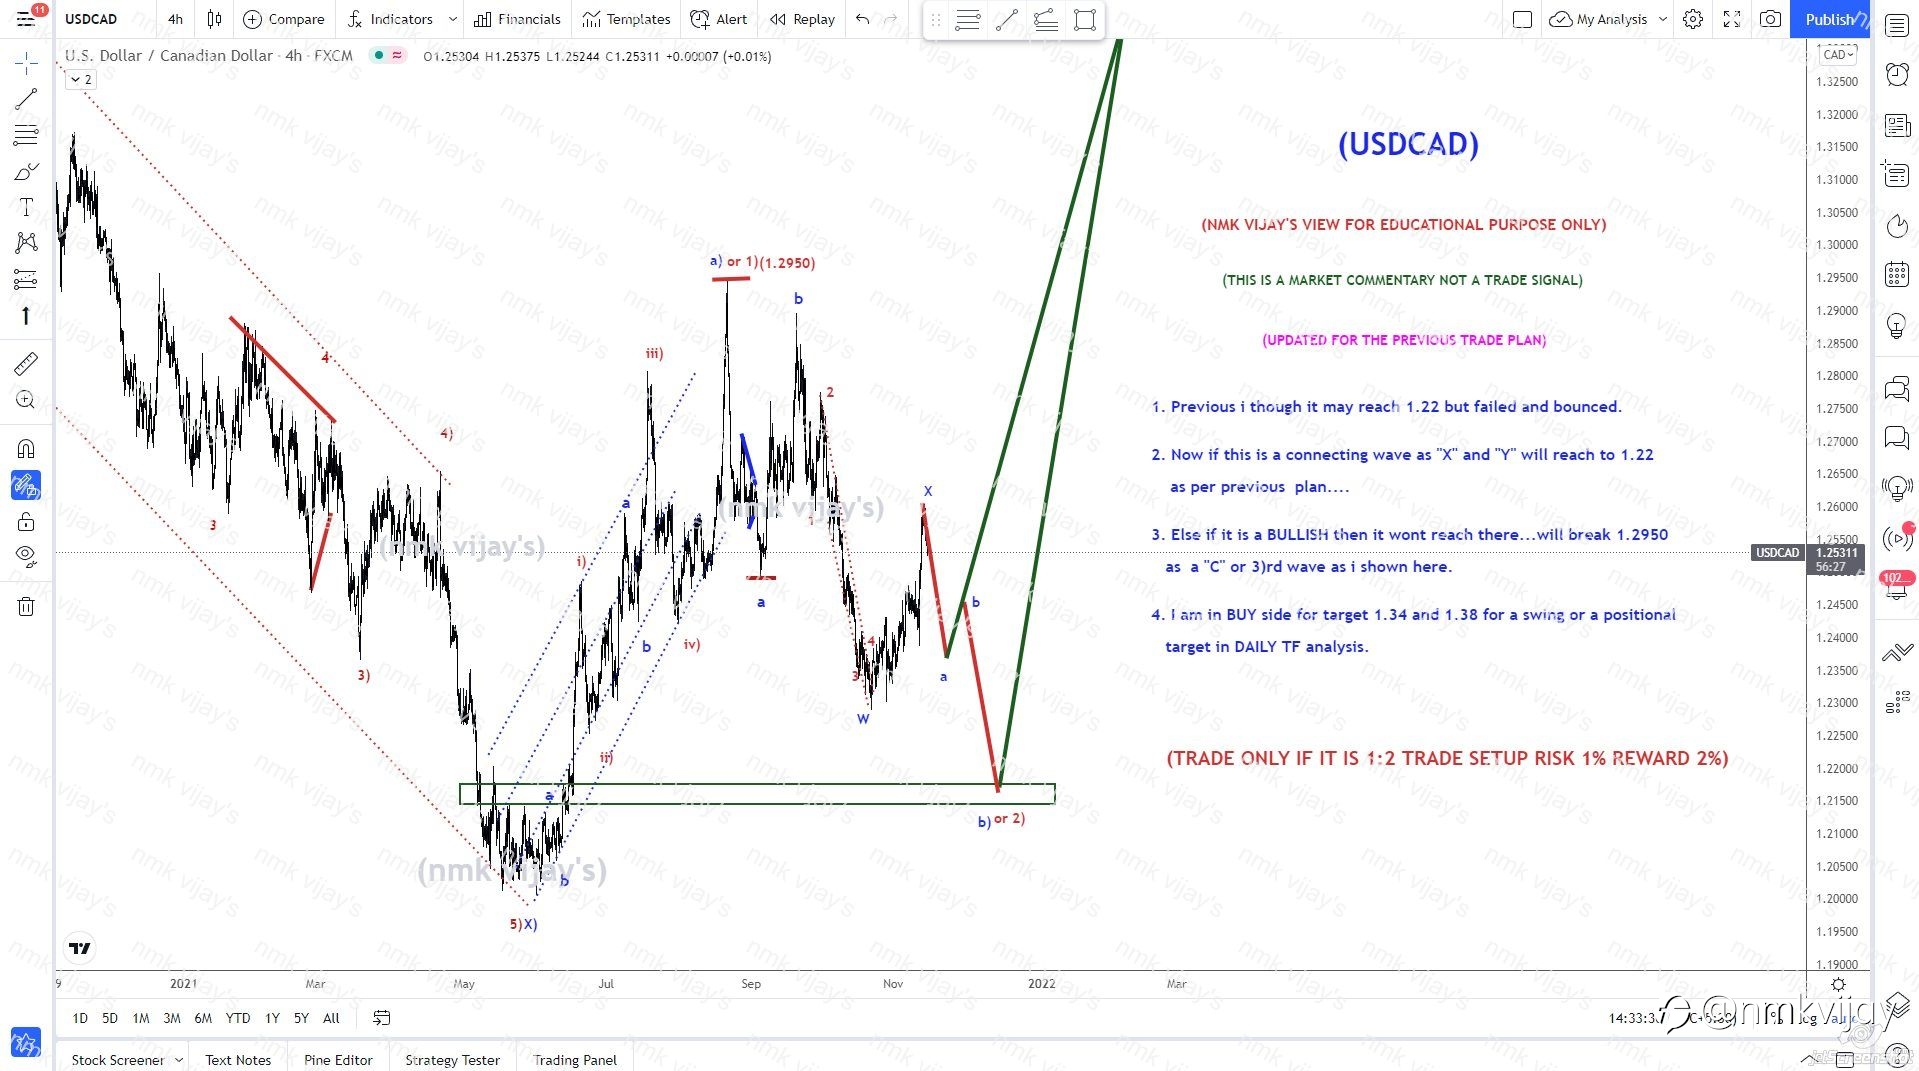 USDCAD-Whether this is a connecting wave X or Bullish ?